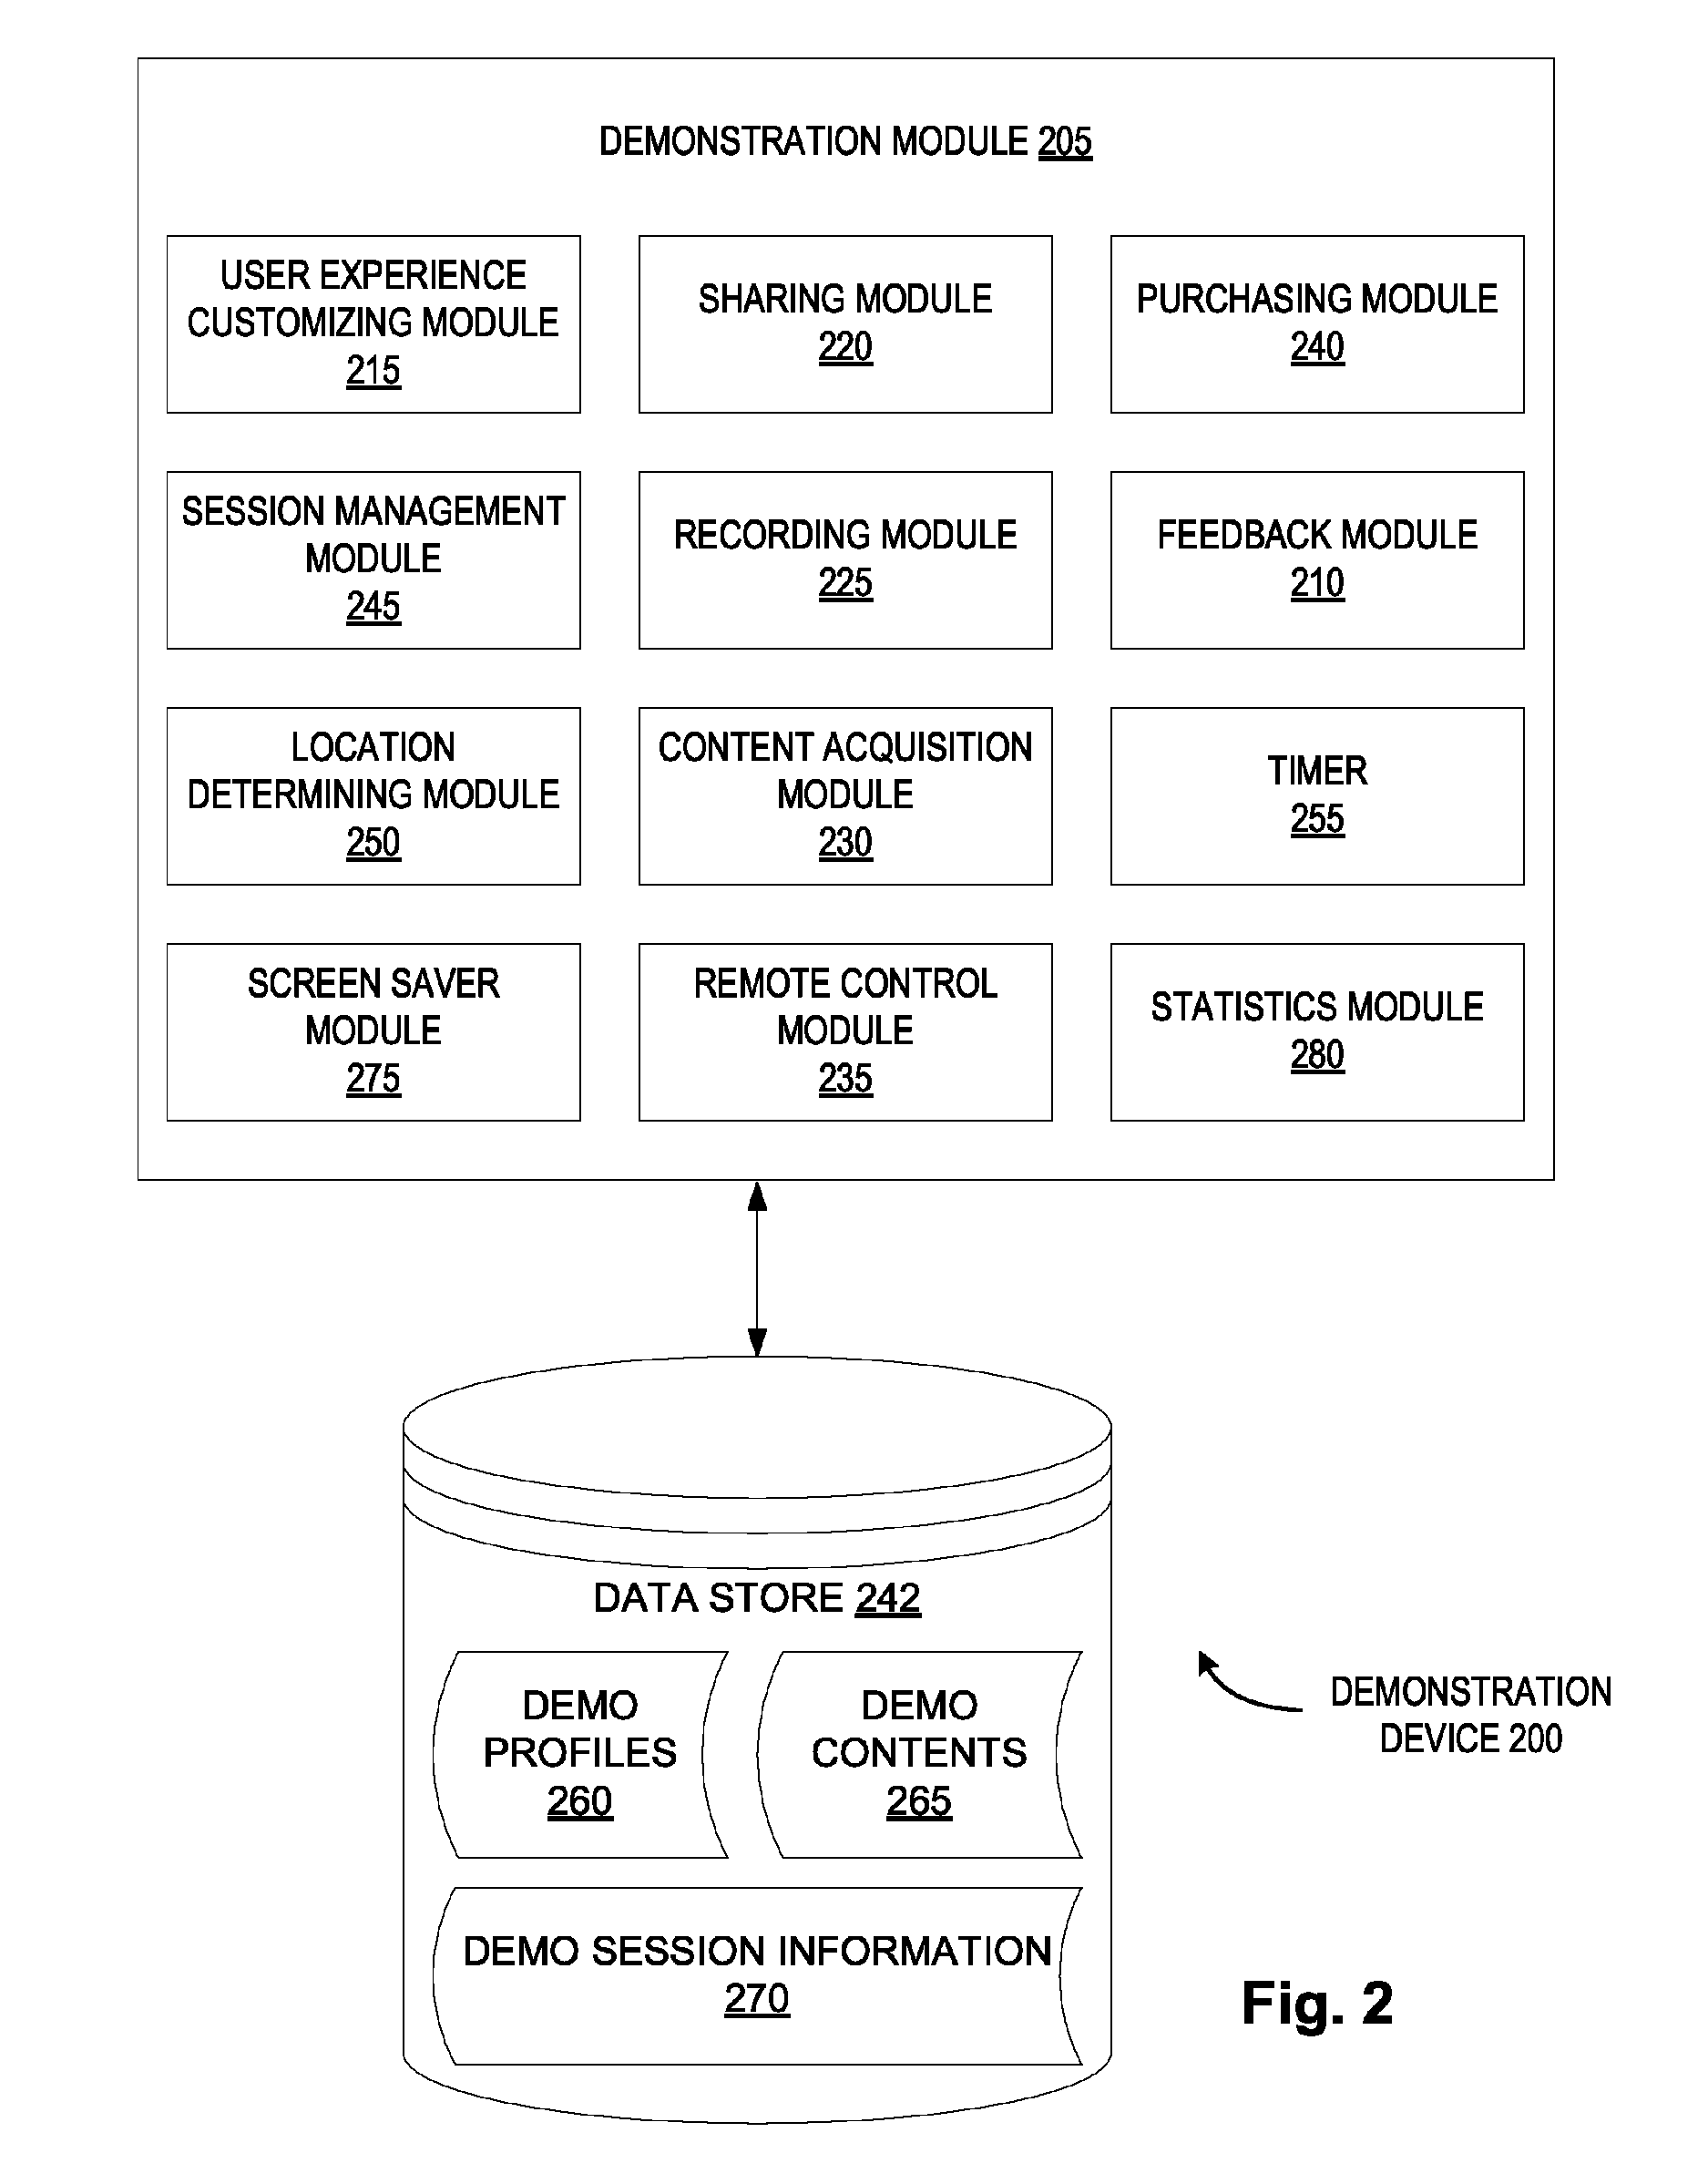 Sharing demonstration information by a network connected demonstration device and system